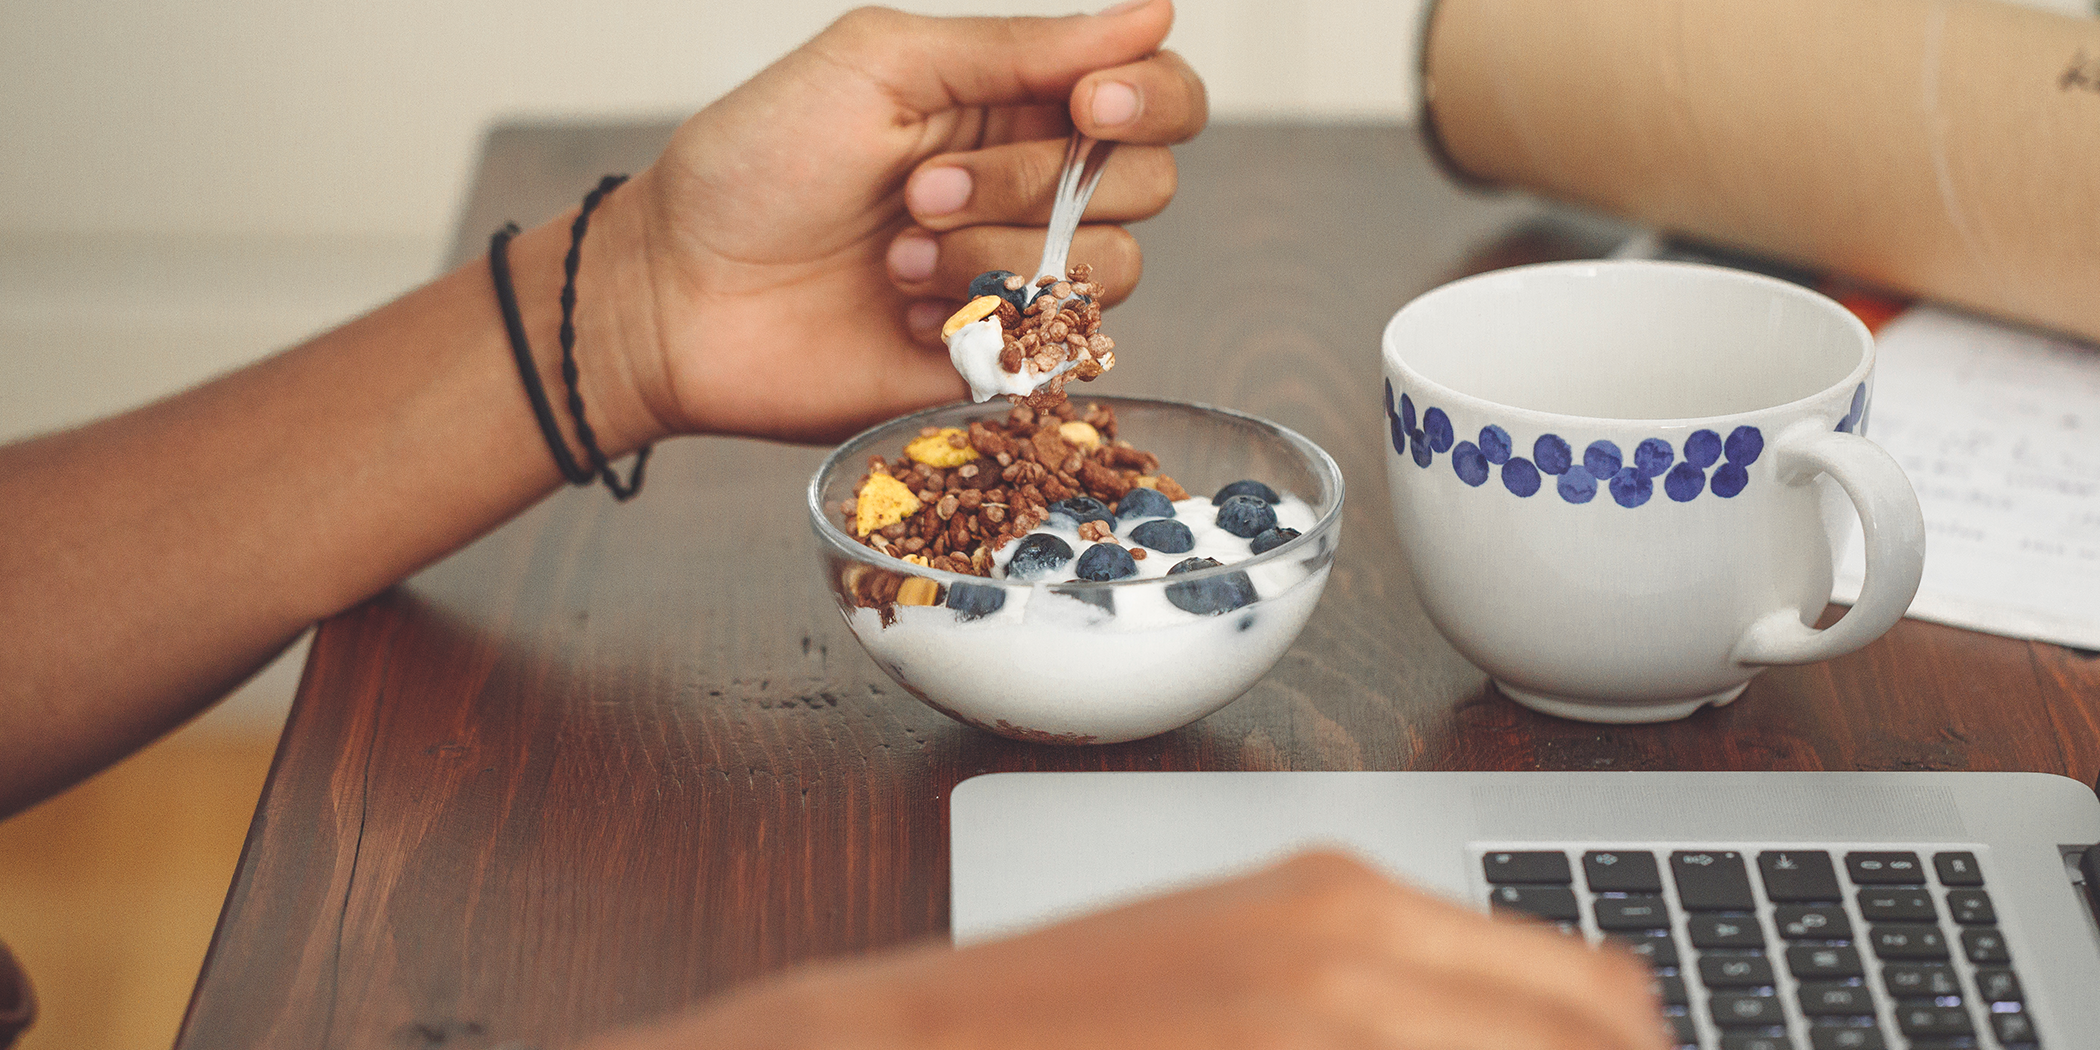 4 High-Energy Foods To Help You Crush Your Finals